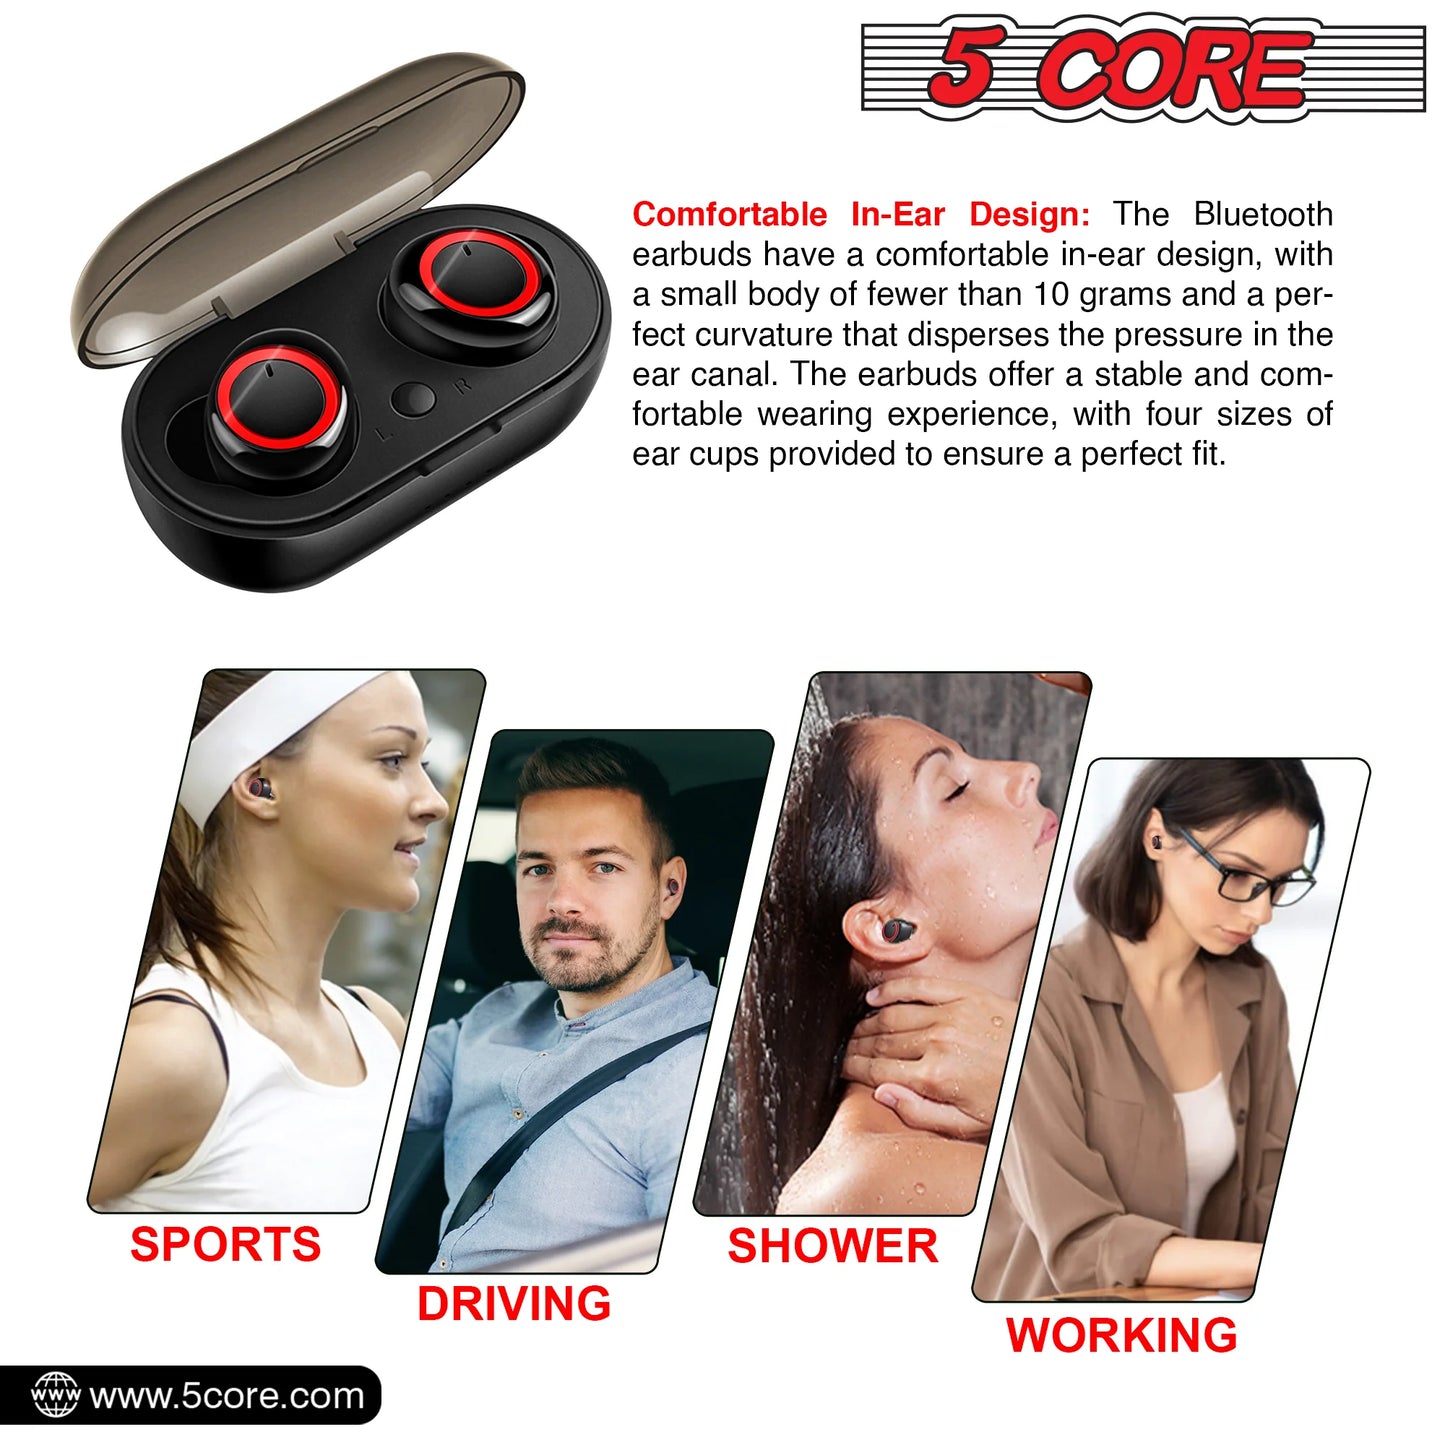 5 Core Wireless Earbuds Black 2 Pieces Noise Canceling Headphones Wireless Bluetooth 5.0 Powerful Beats and Clean Audio True Wireless Earbuds W Extra Long Playback Use as Gym Headphones Gaming Calling- EP01 2PCS